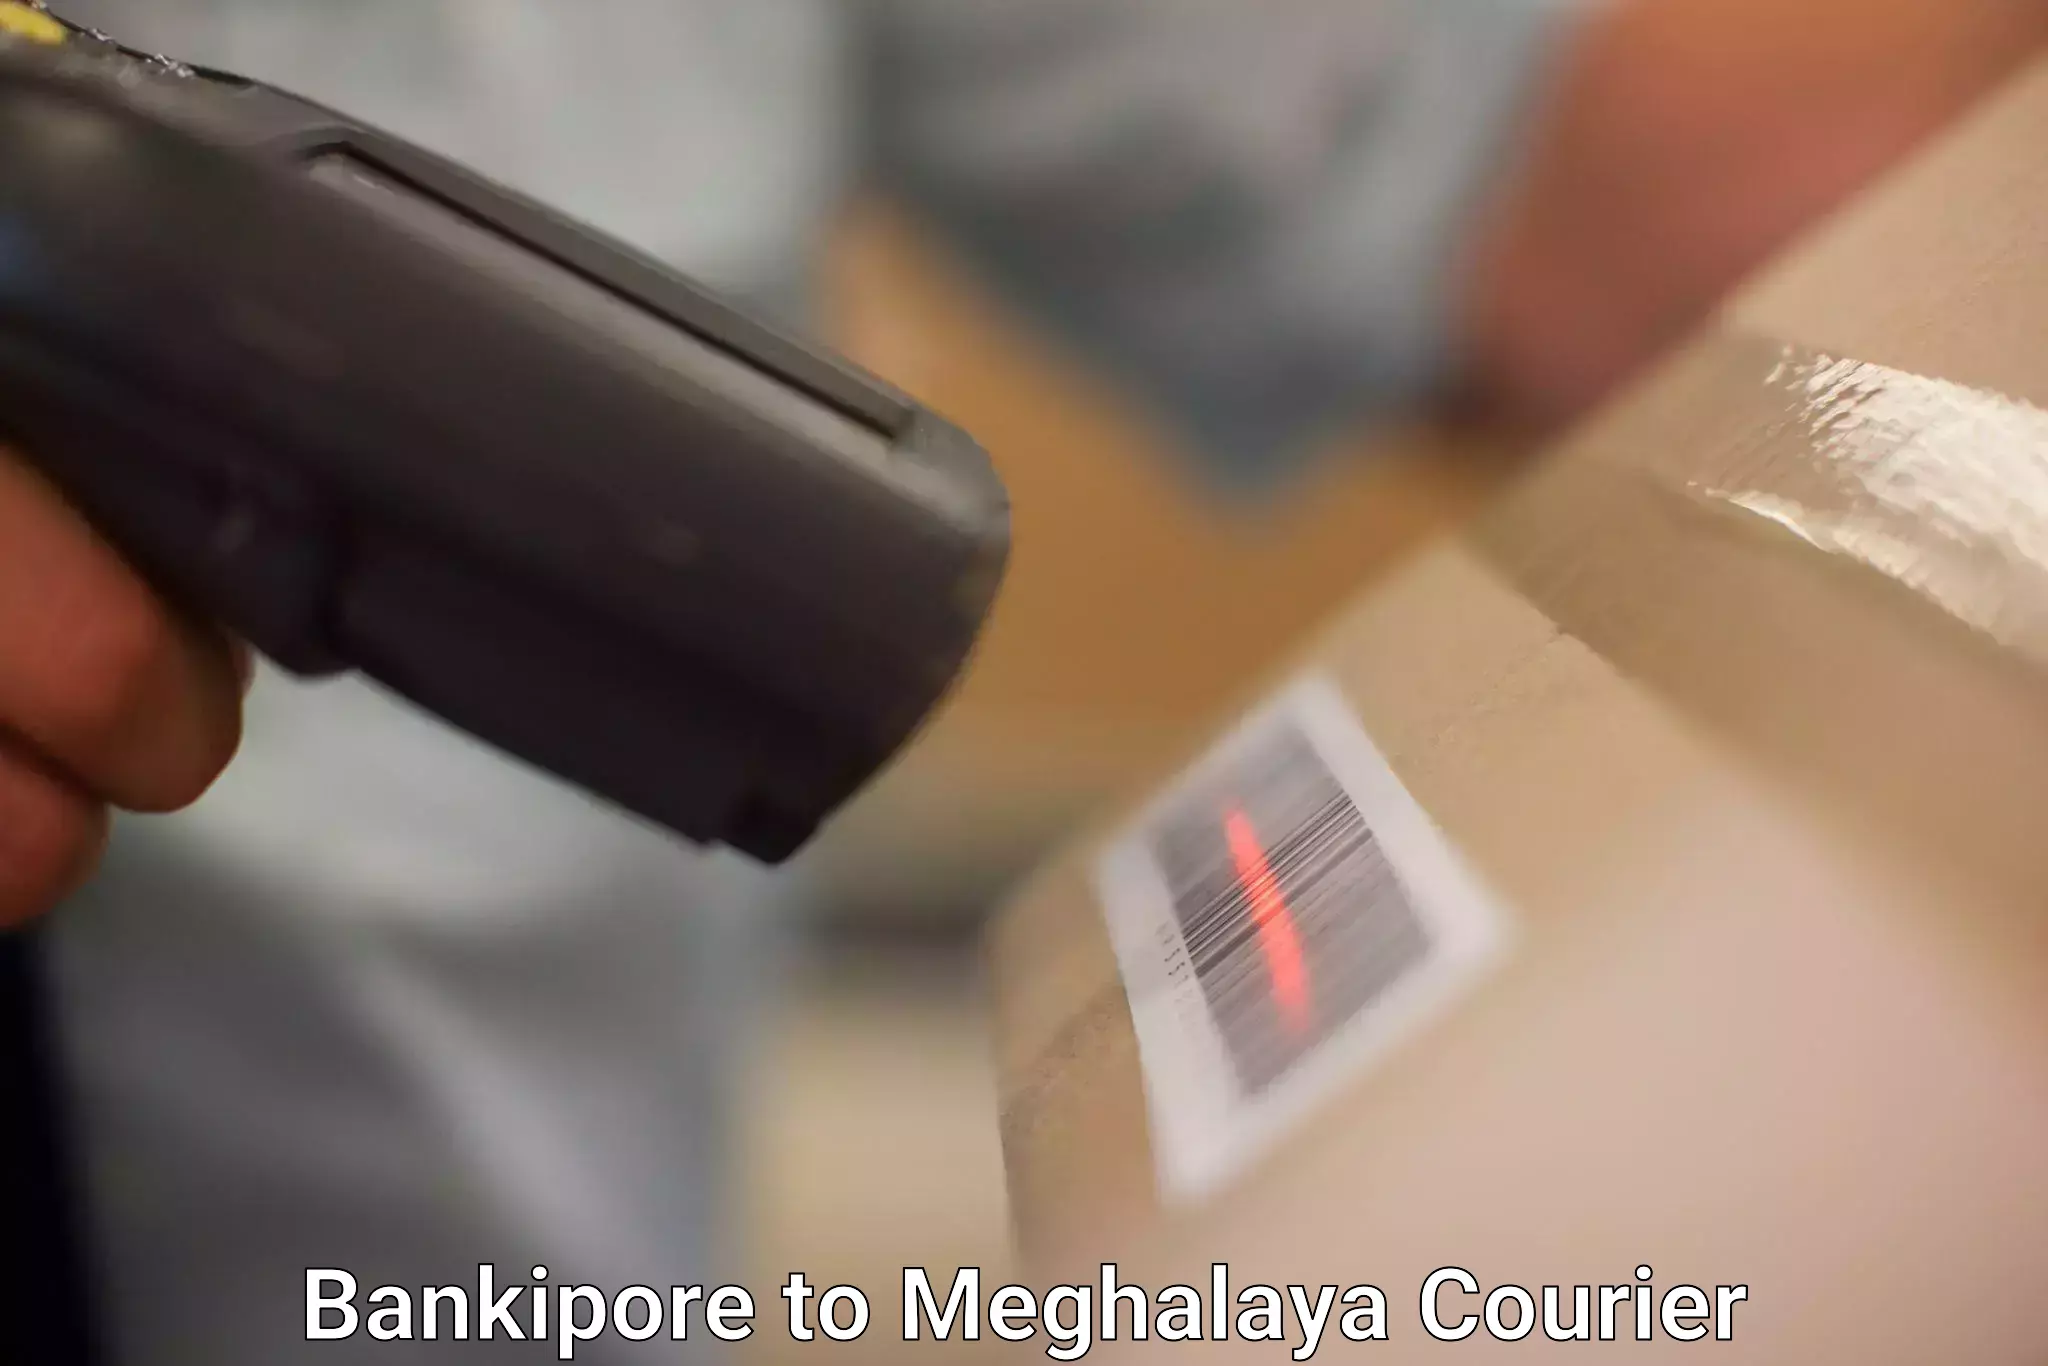 Courier service innovation in Bankipore to Meghalaya